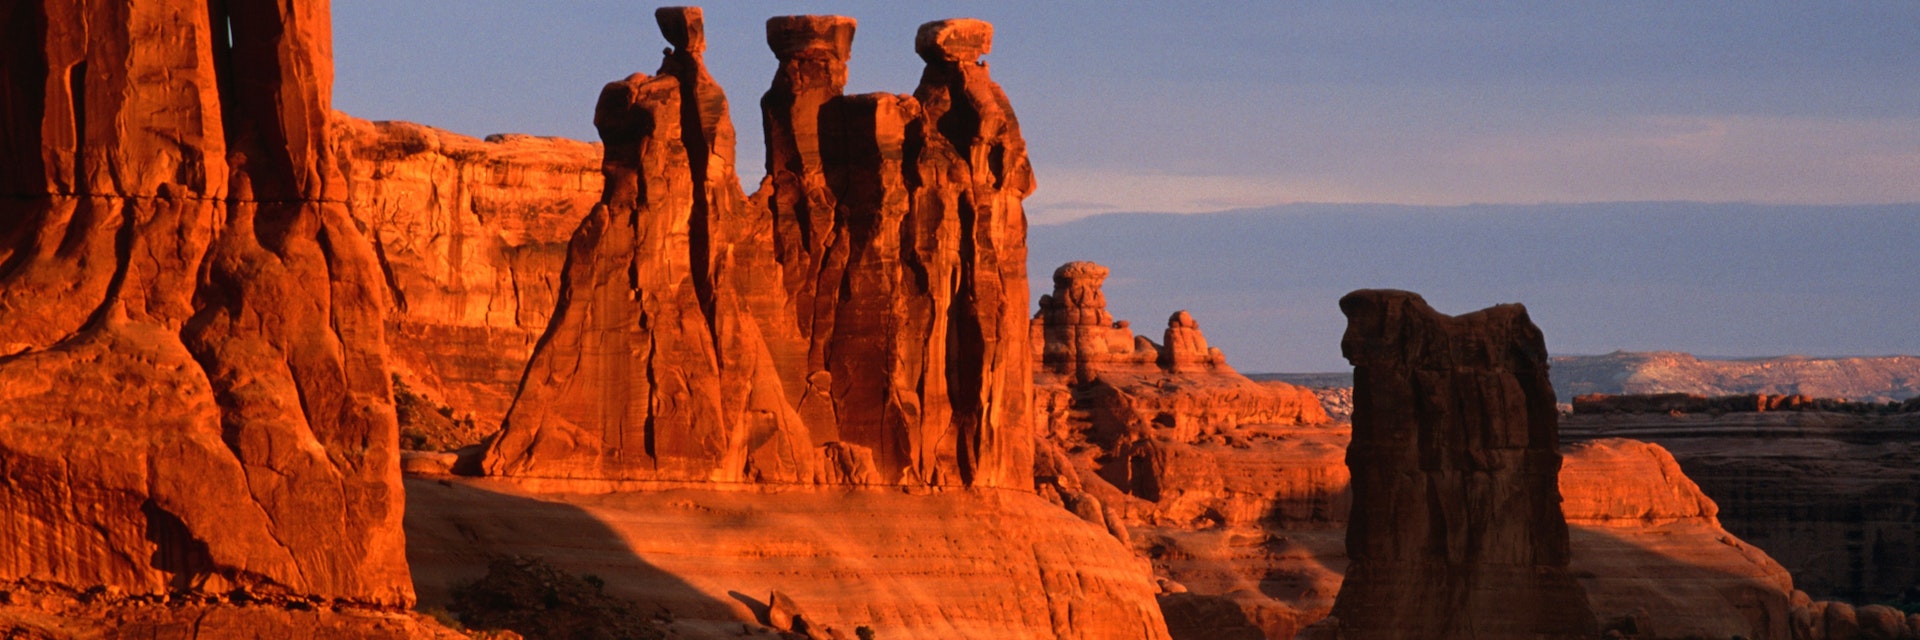 Three Gossips in Arches National Park.